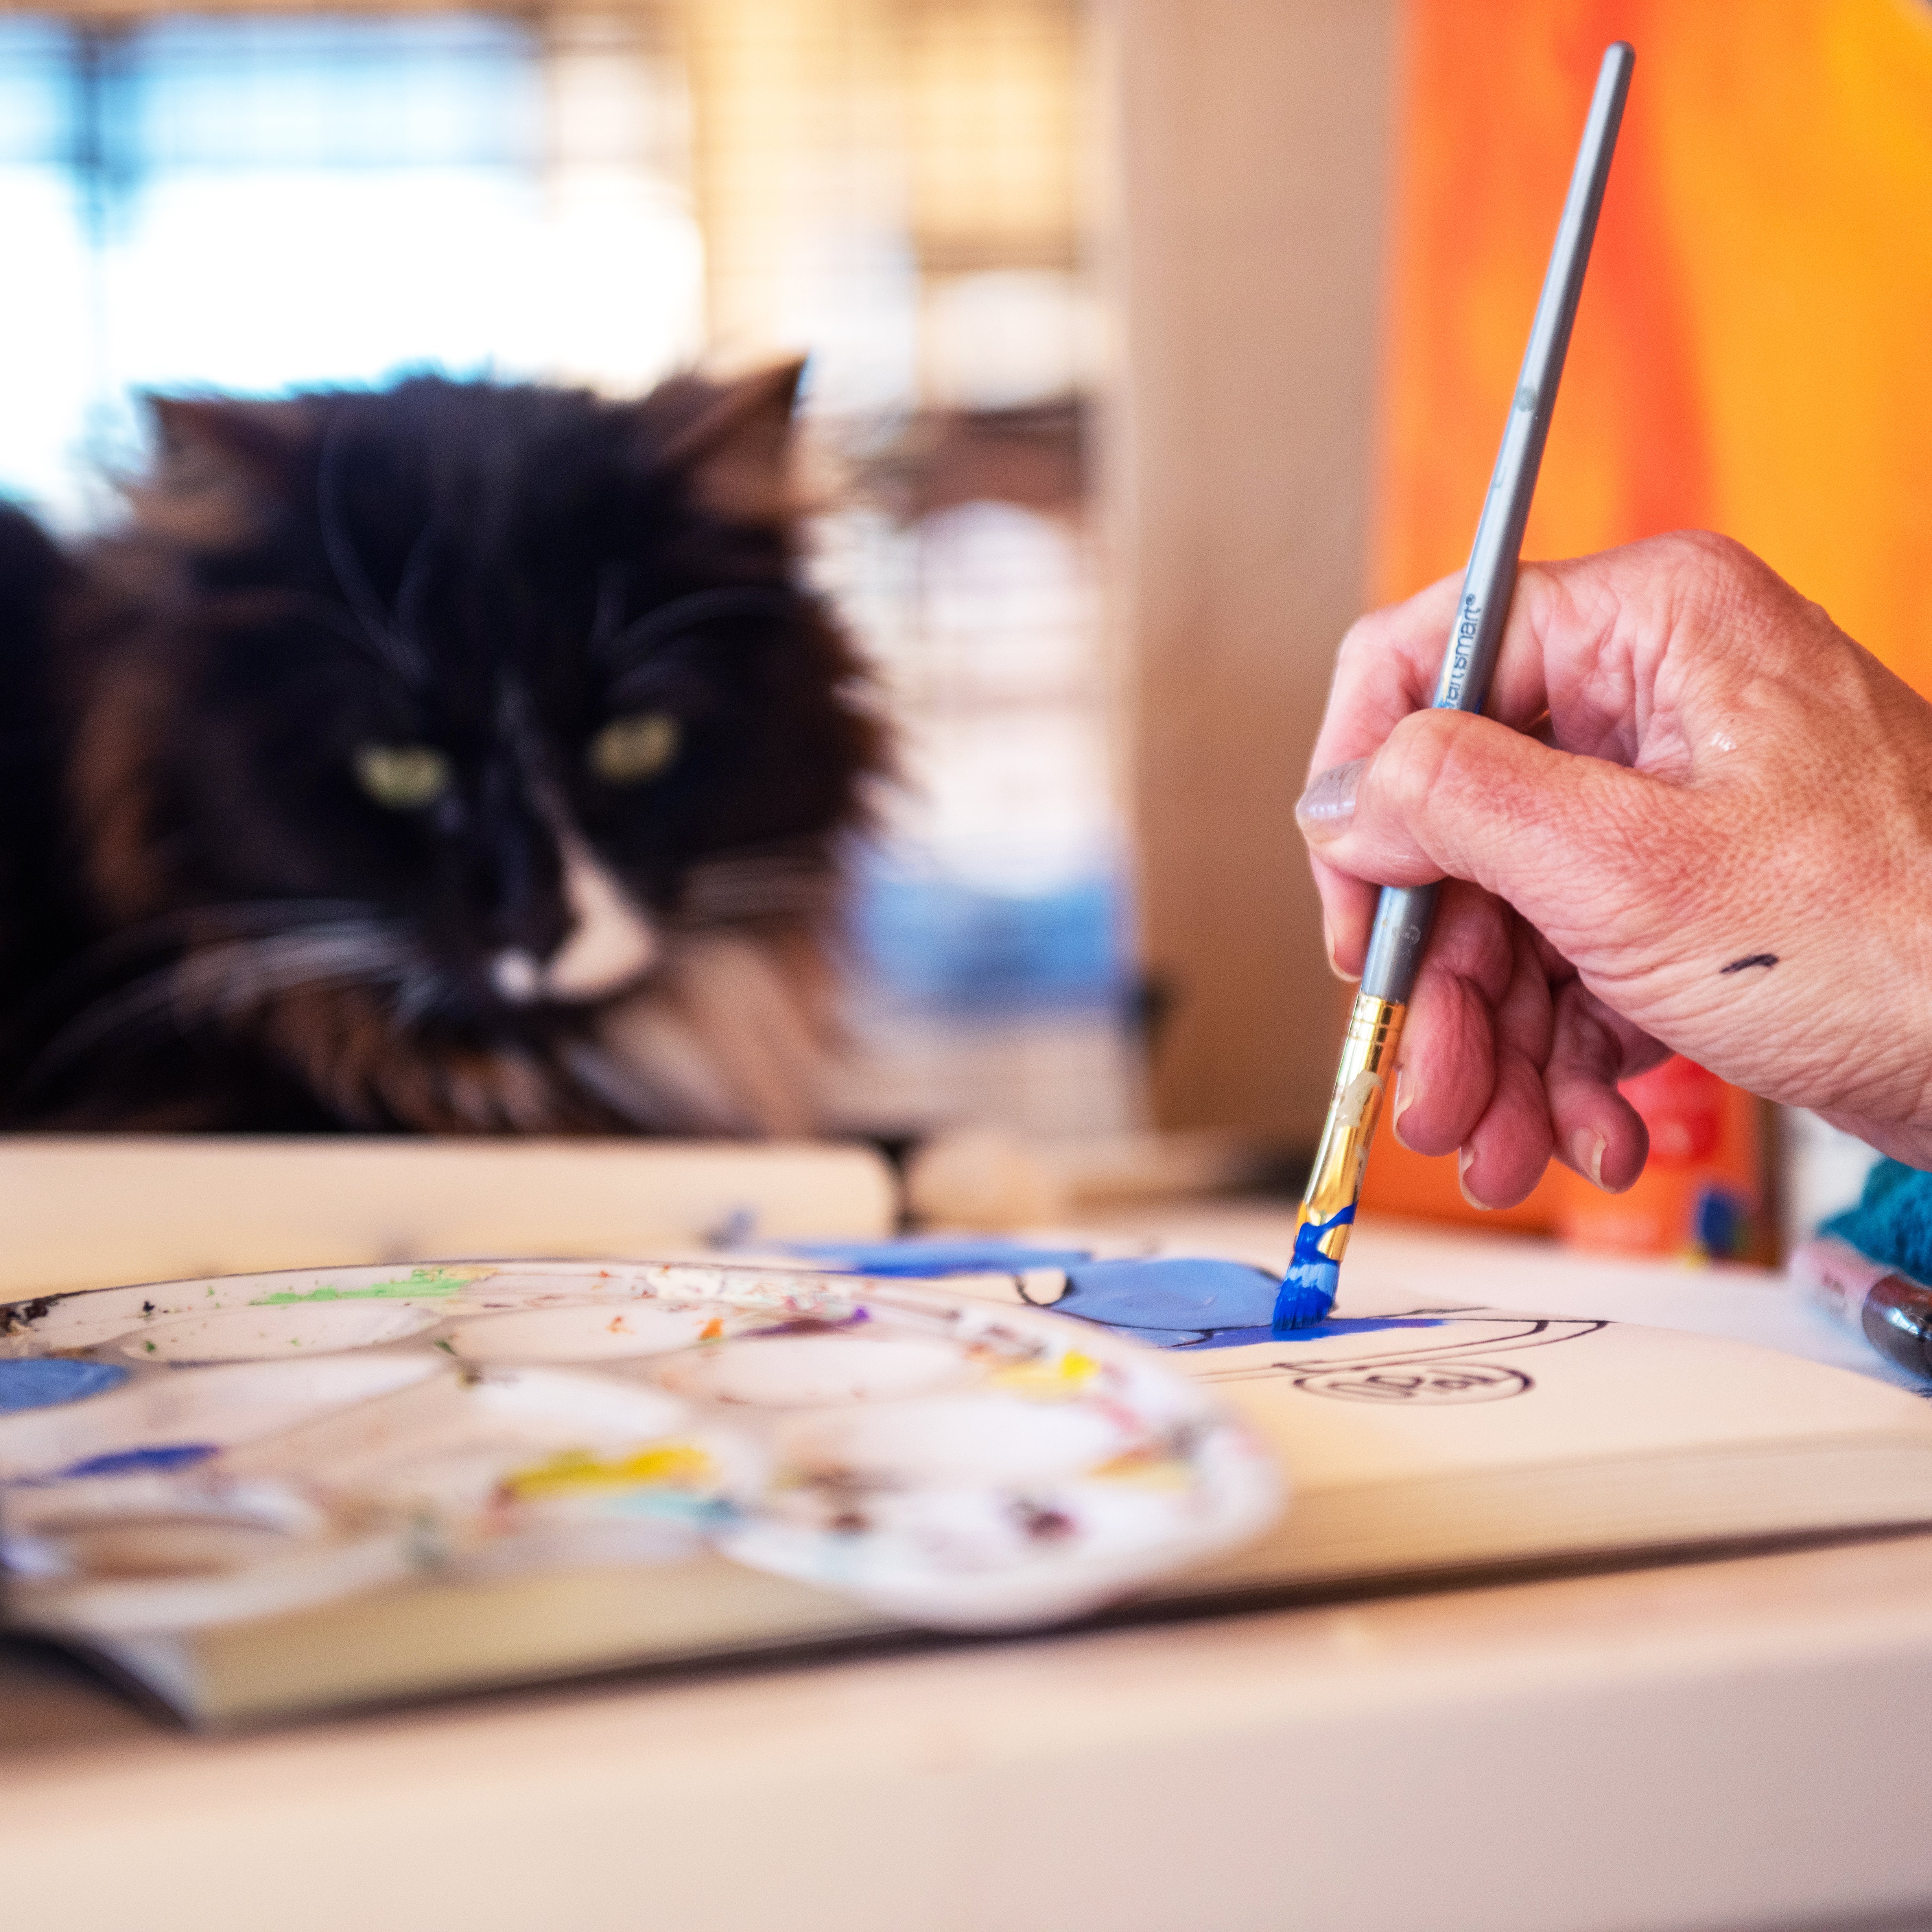 Person painting on a table while a cat looks on with interest